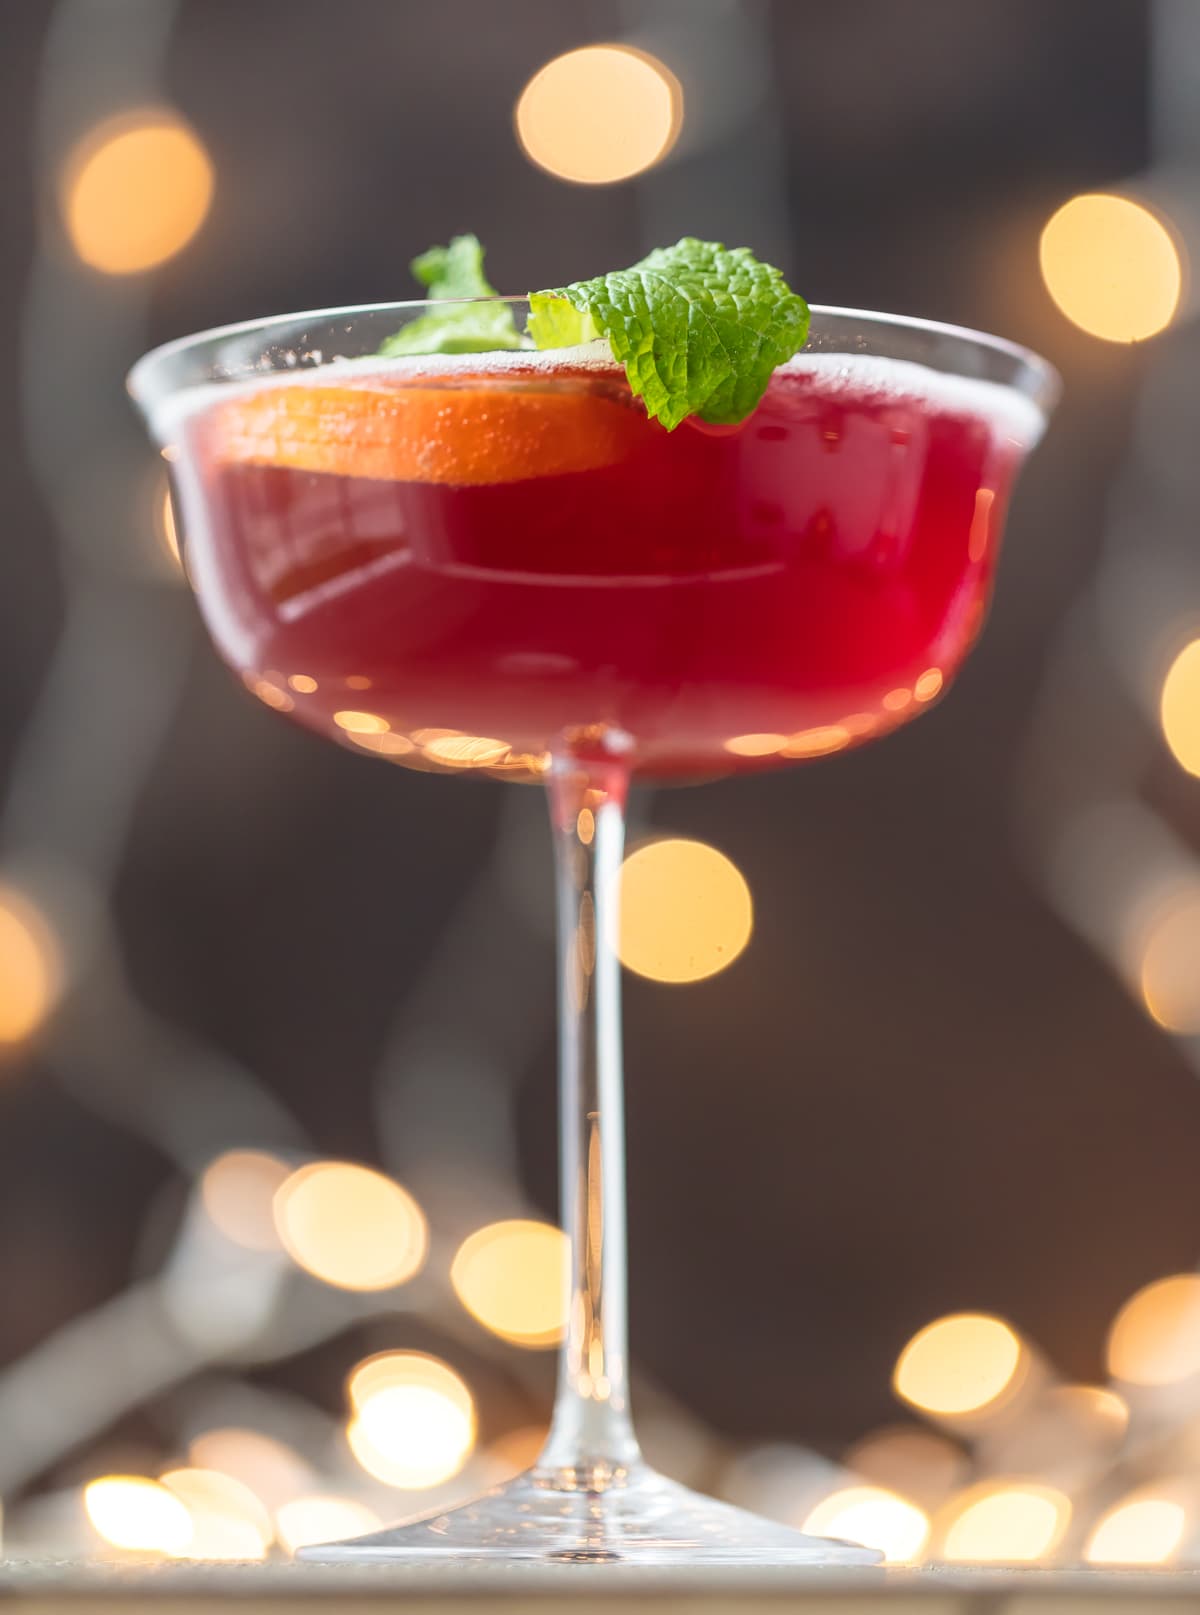 This SPARKLING HOLIDAY FLIRTINI is fun, pretty, and delicious! Cranberry and pineapple juice mixed with orange vodka and topped with red moscato champagne, what could be better or more festive for Christmas or New Years Eve!